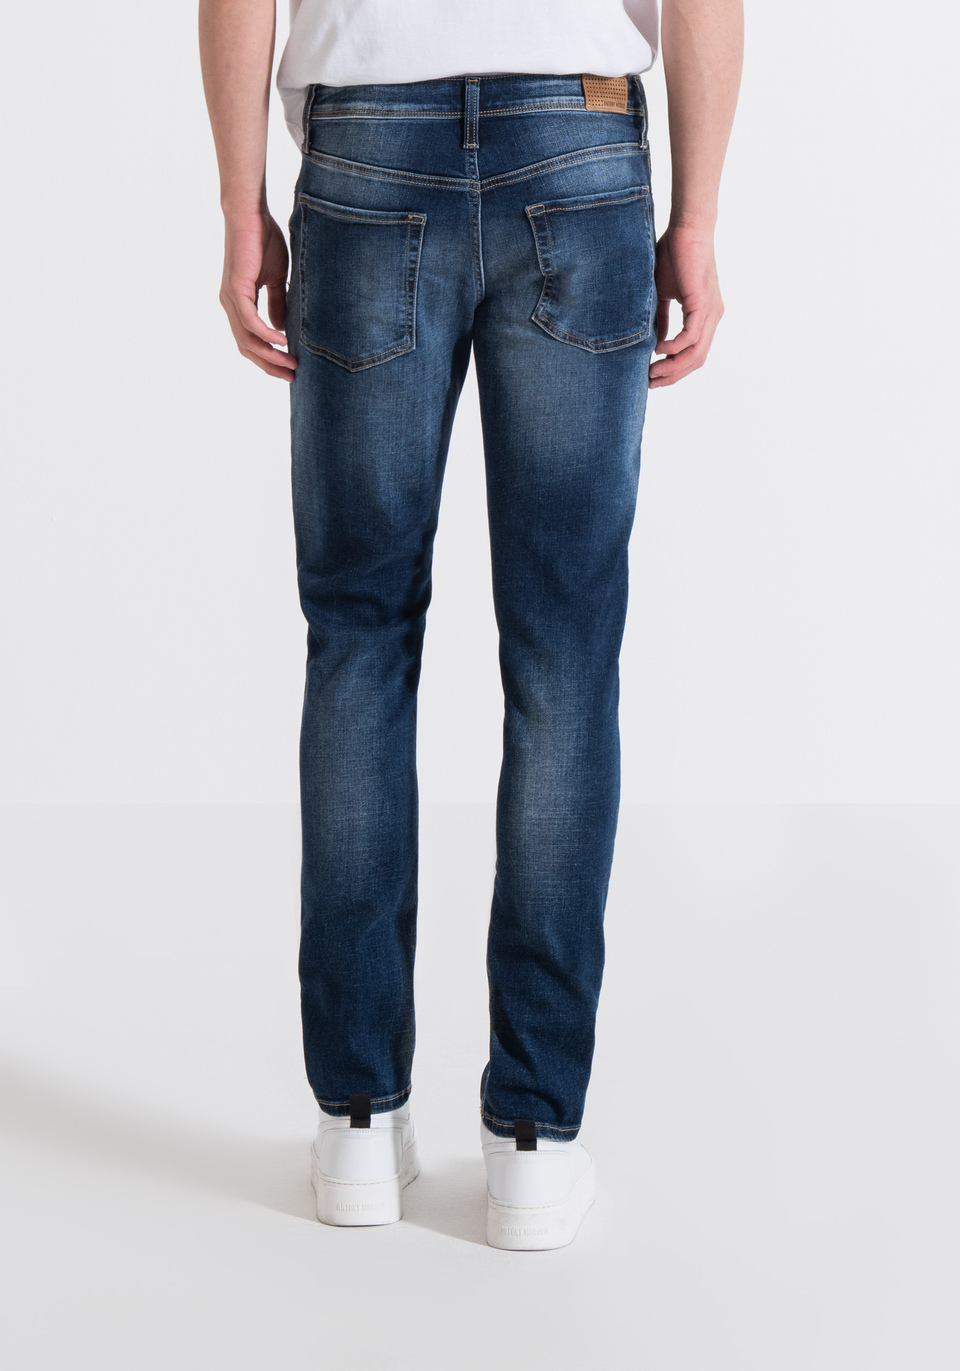 JEANS TAPERED FIT „OZZY“ AUS STRETCH-DENIM DUNKLE WASCHUNG - Antony Morato Online Shop